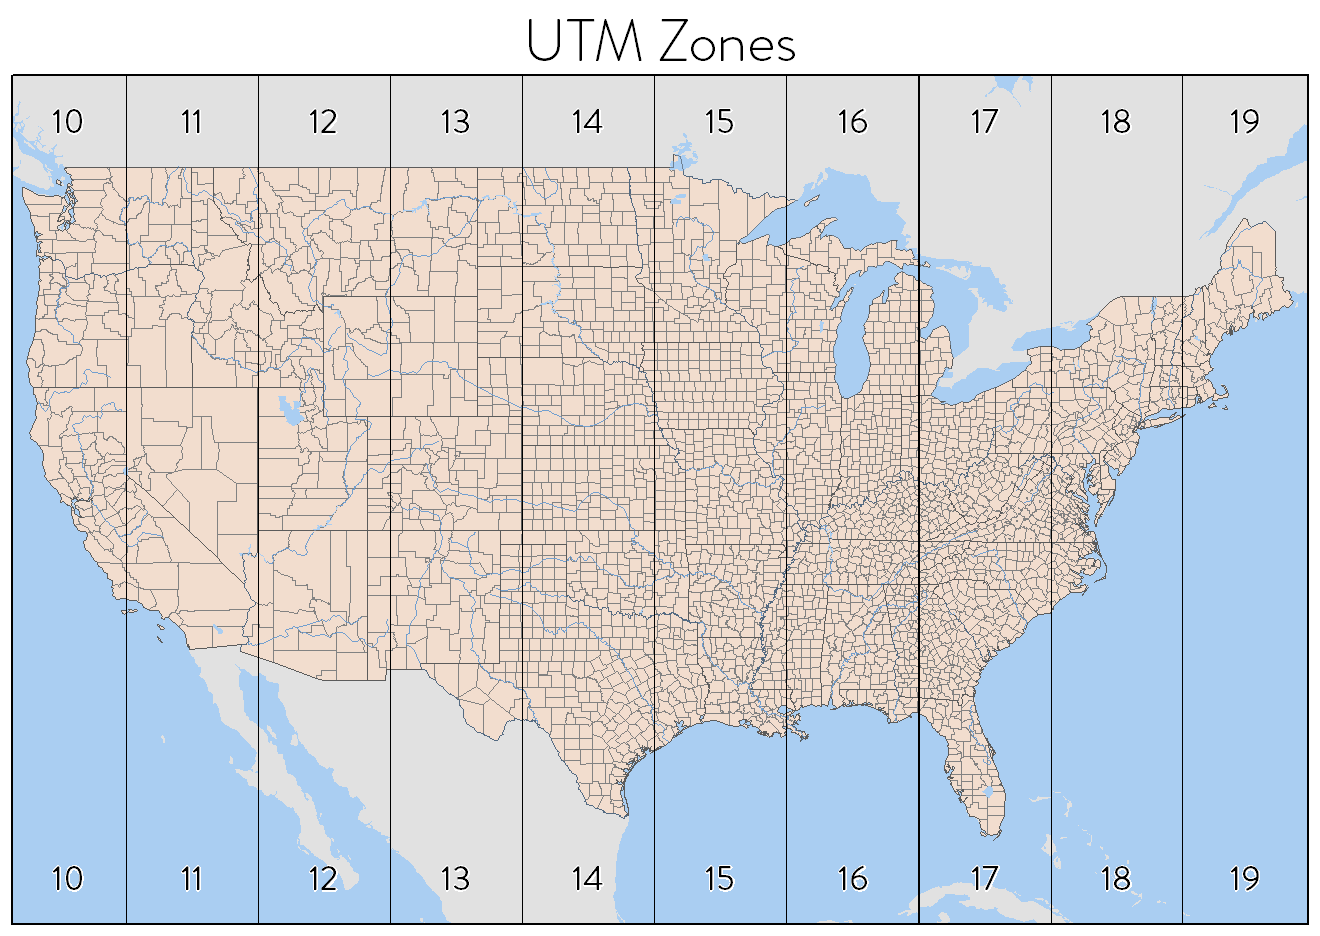 Nerd tips for things you probably won't use: Higher Quality UTM Zones Map